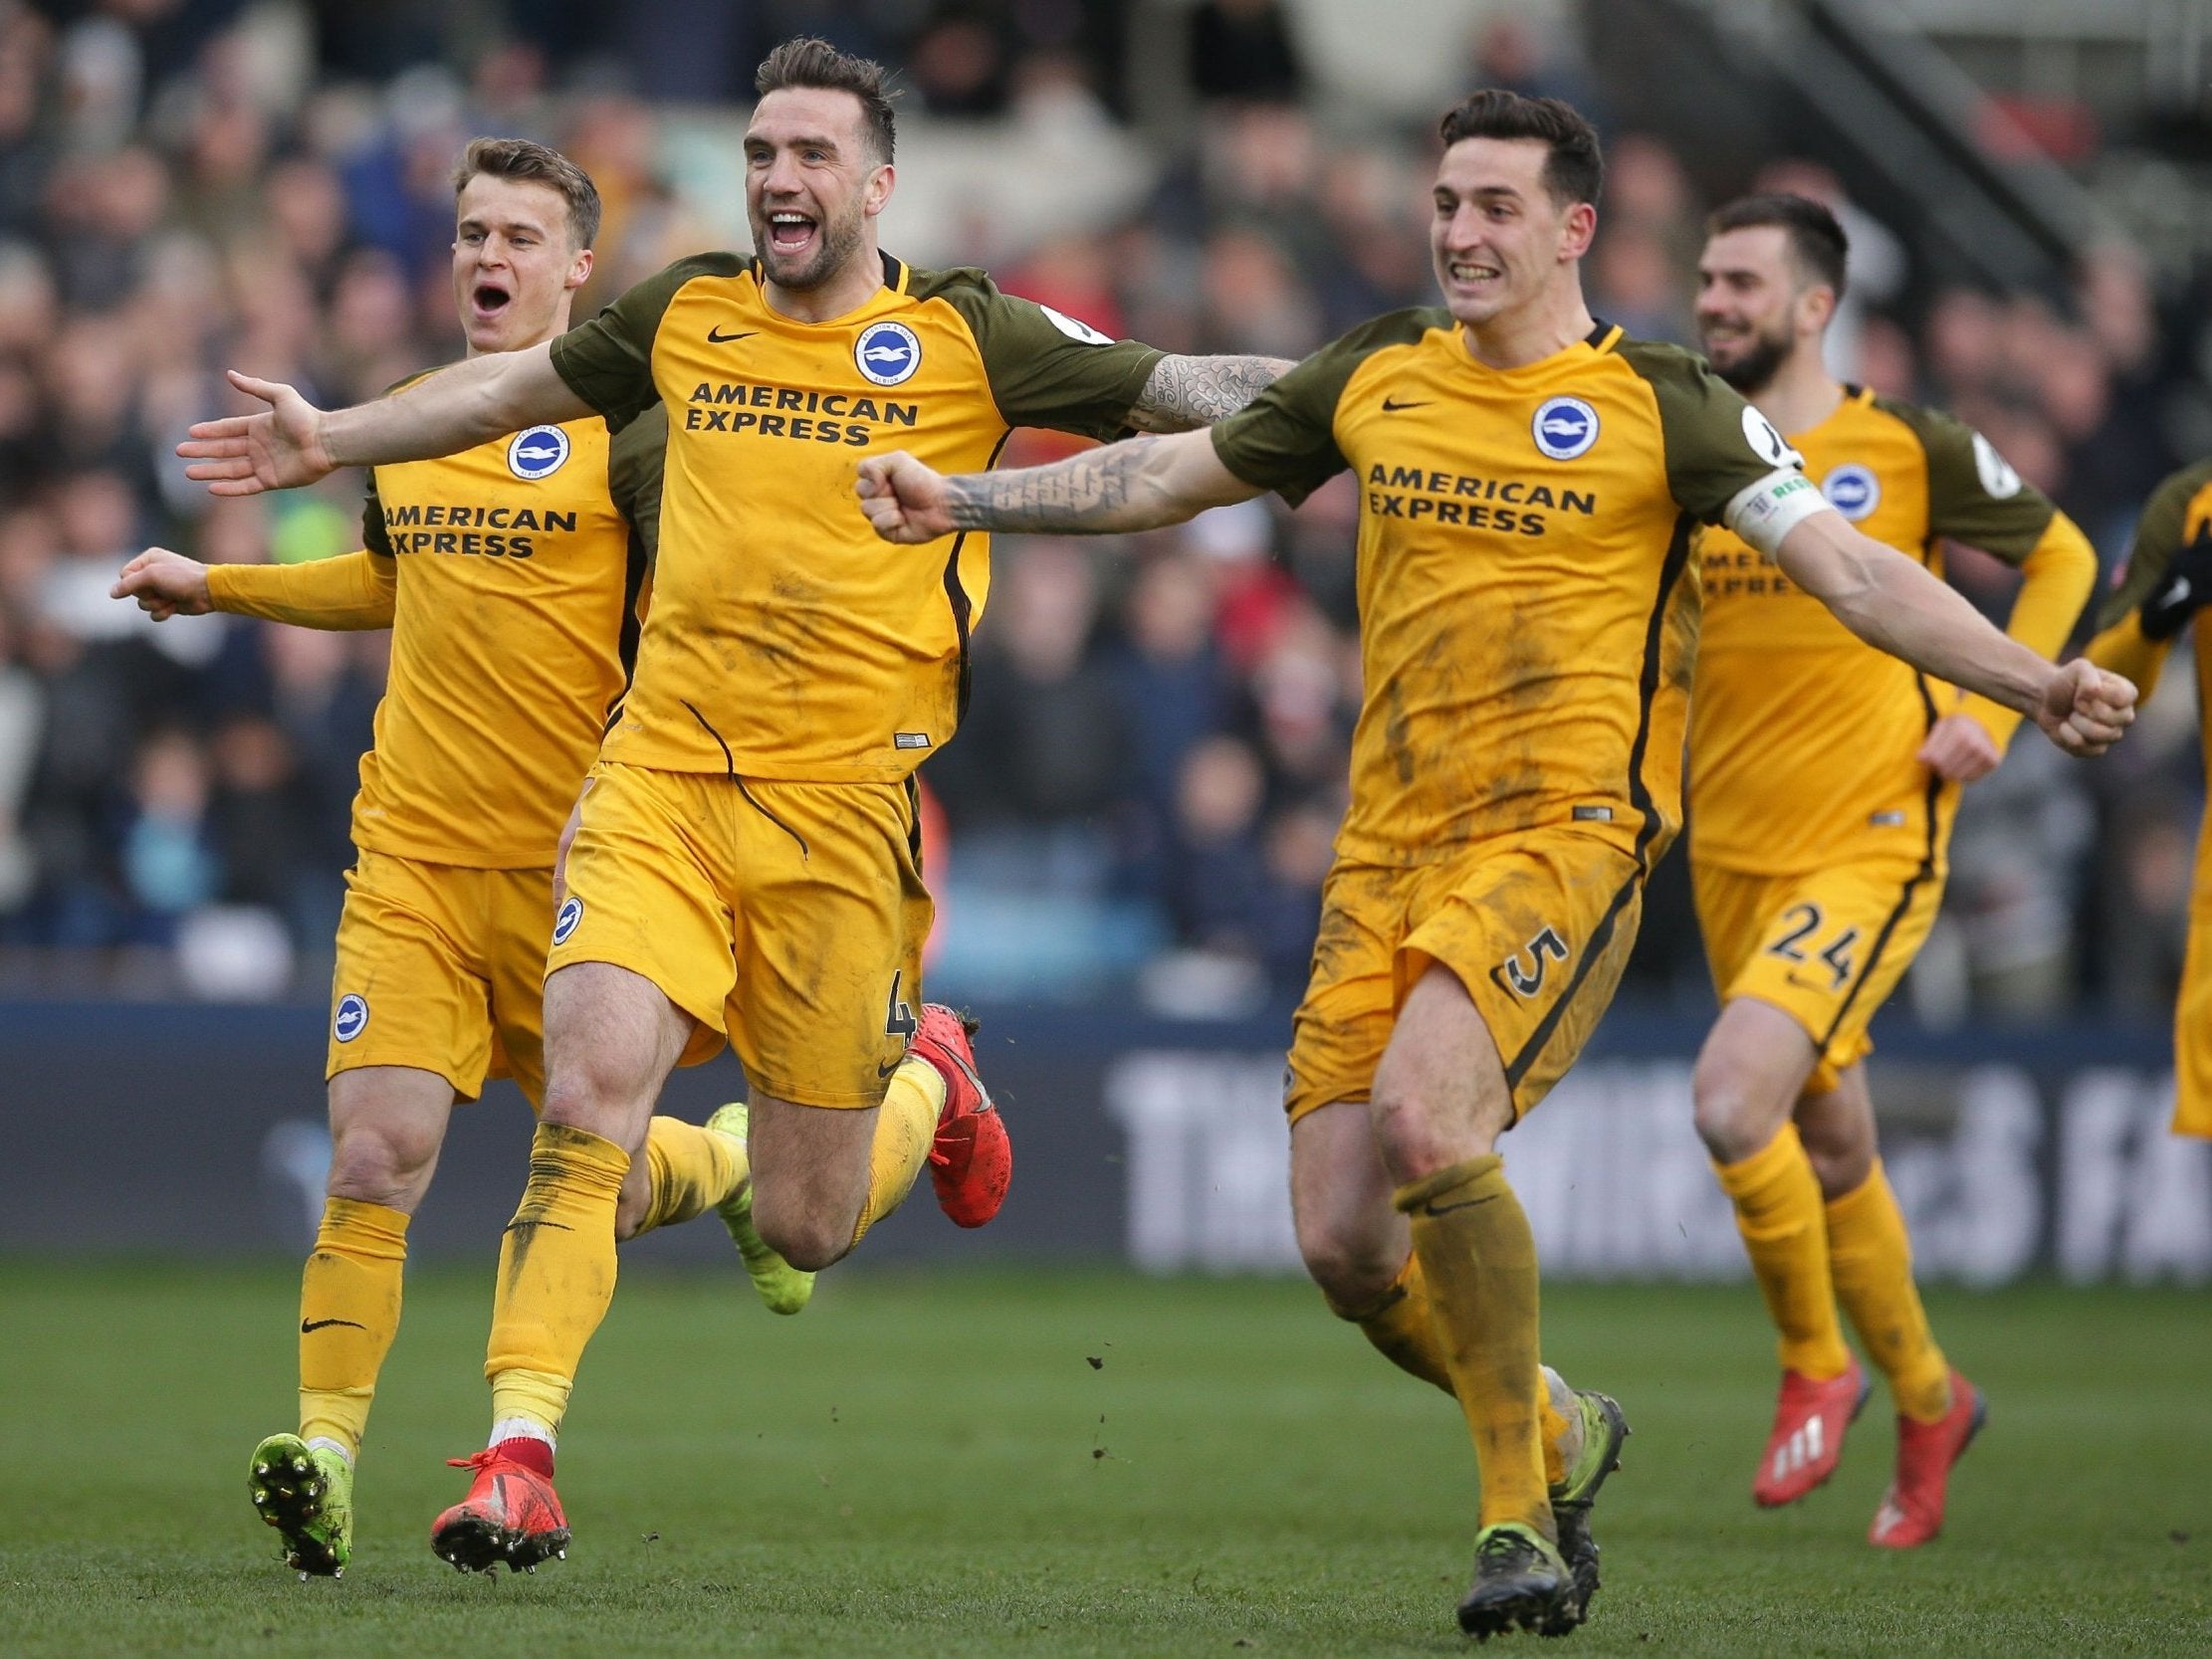 Millwall vs Brighton result: Jake Cooper misses penalty in sudden-death shootout to send Seagulls to Wembley